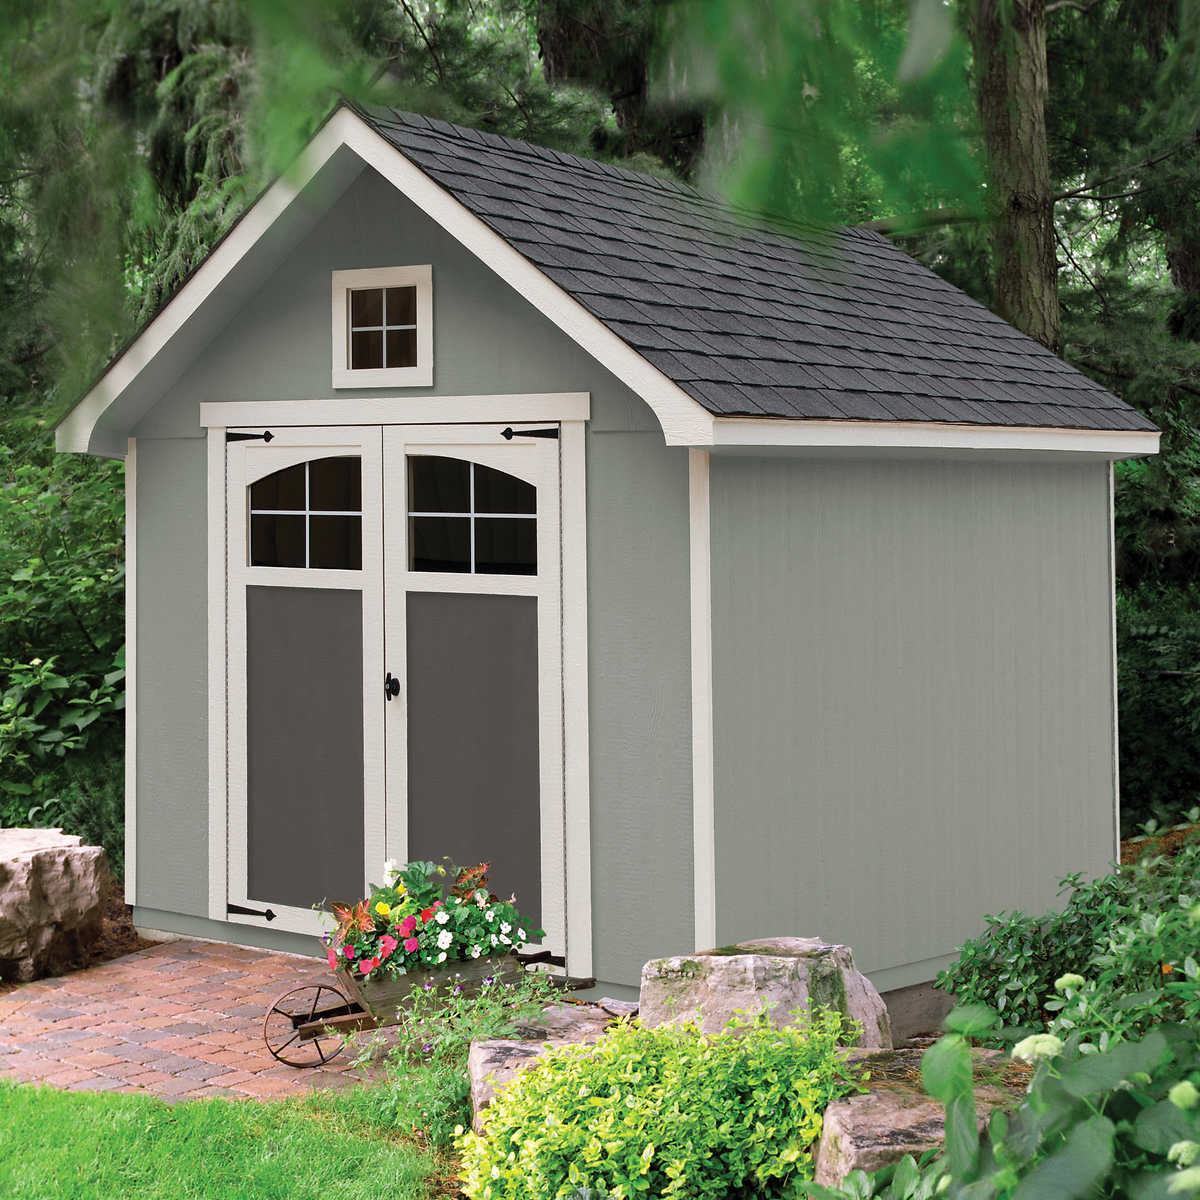 Ridgepointe 8 X 12 Wood Storage Shed, Shelving Systems For Sheds